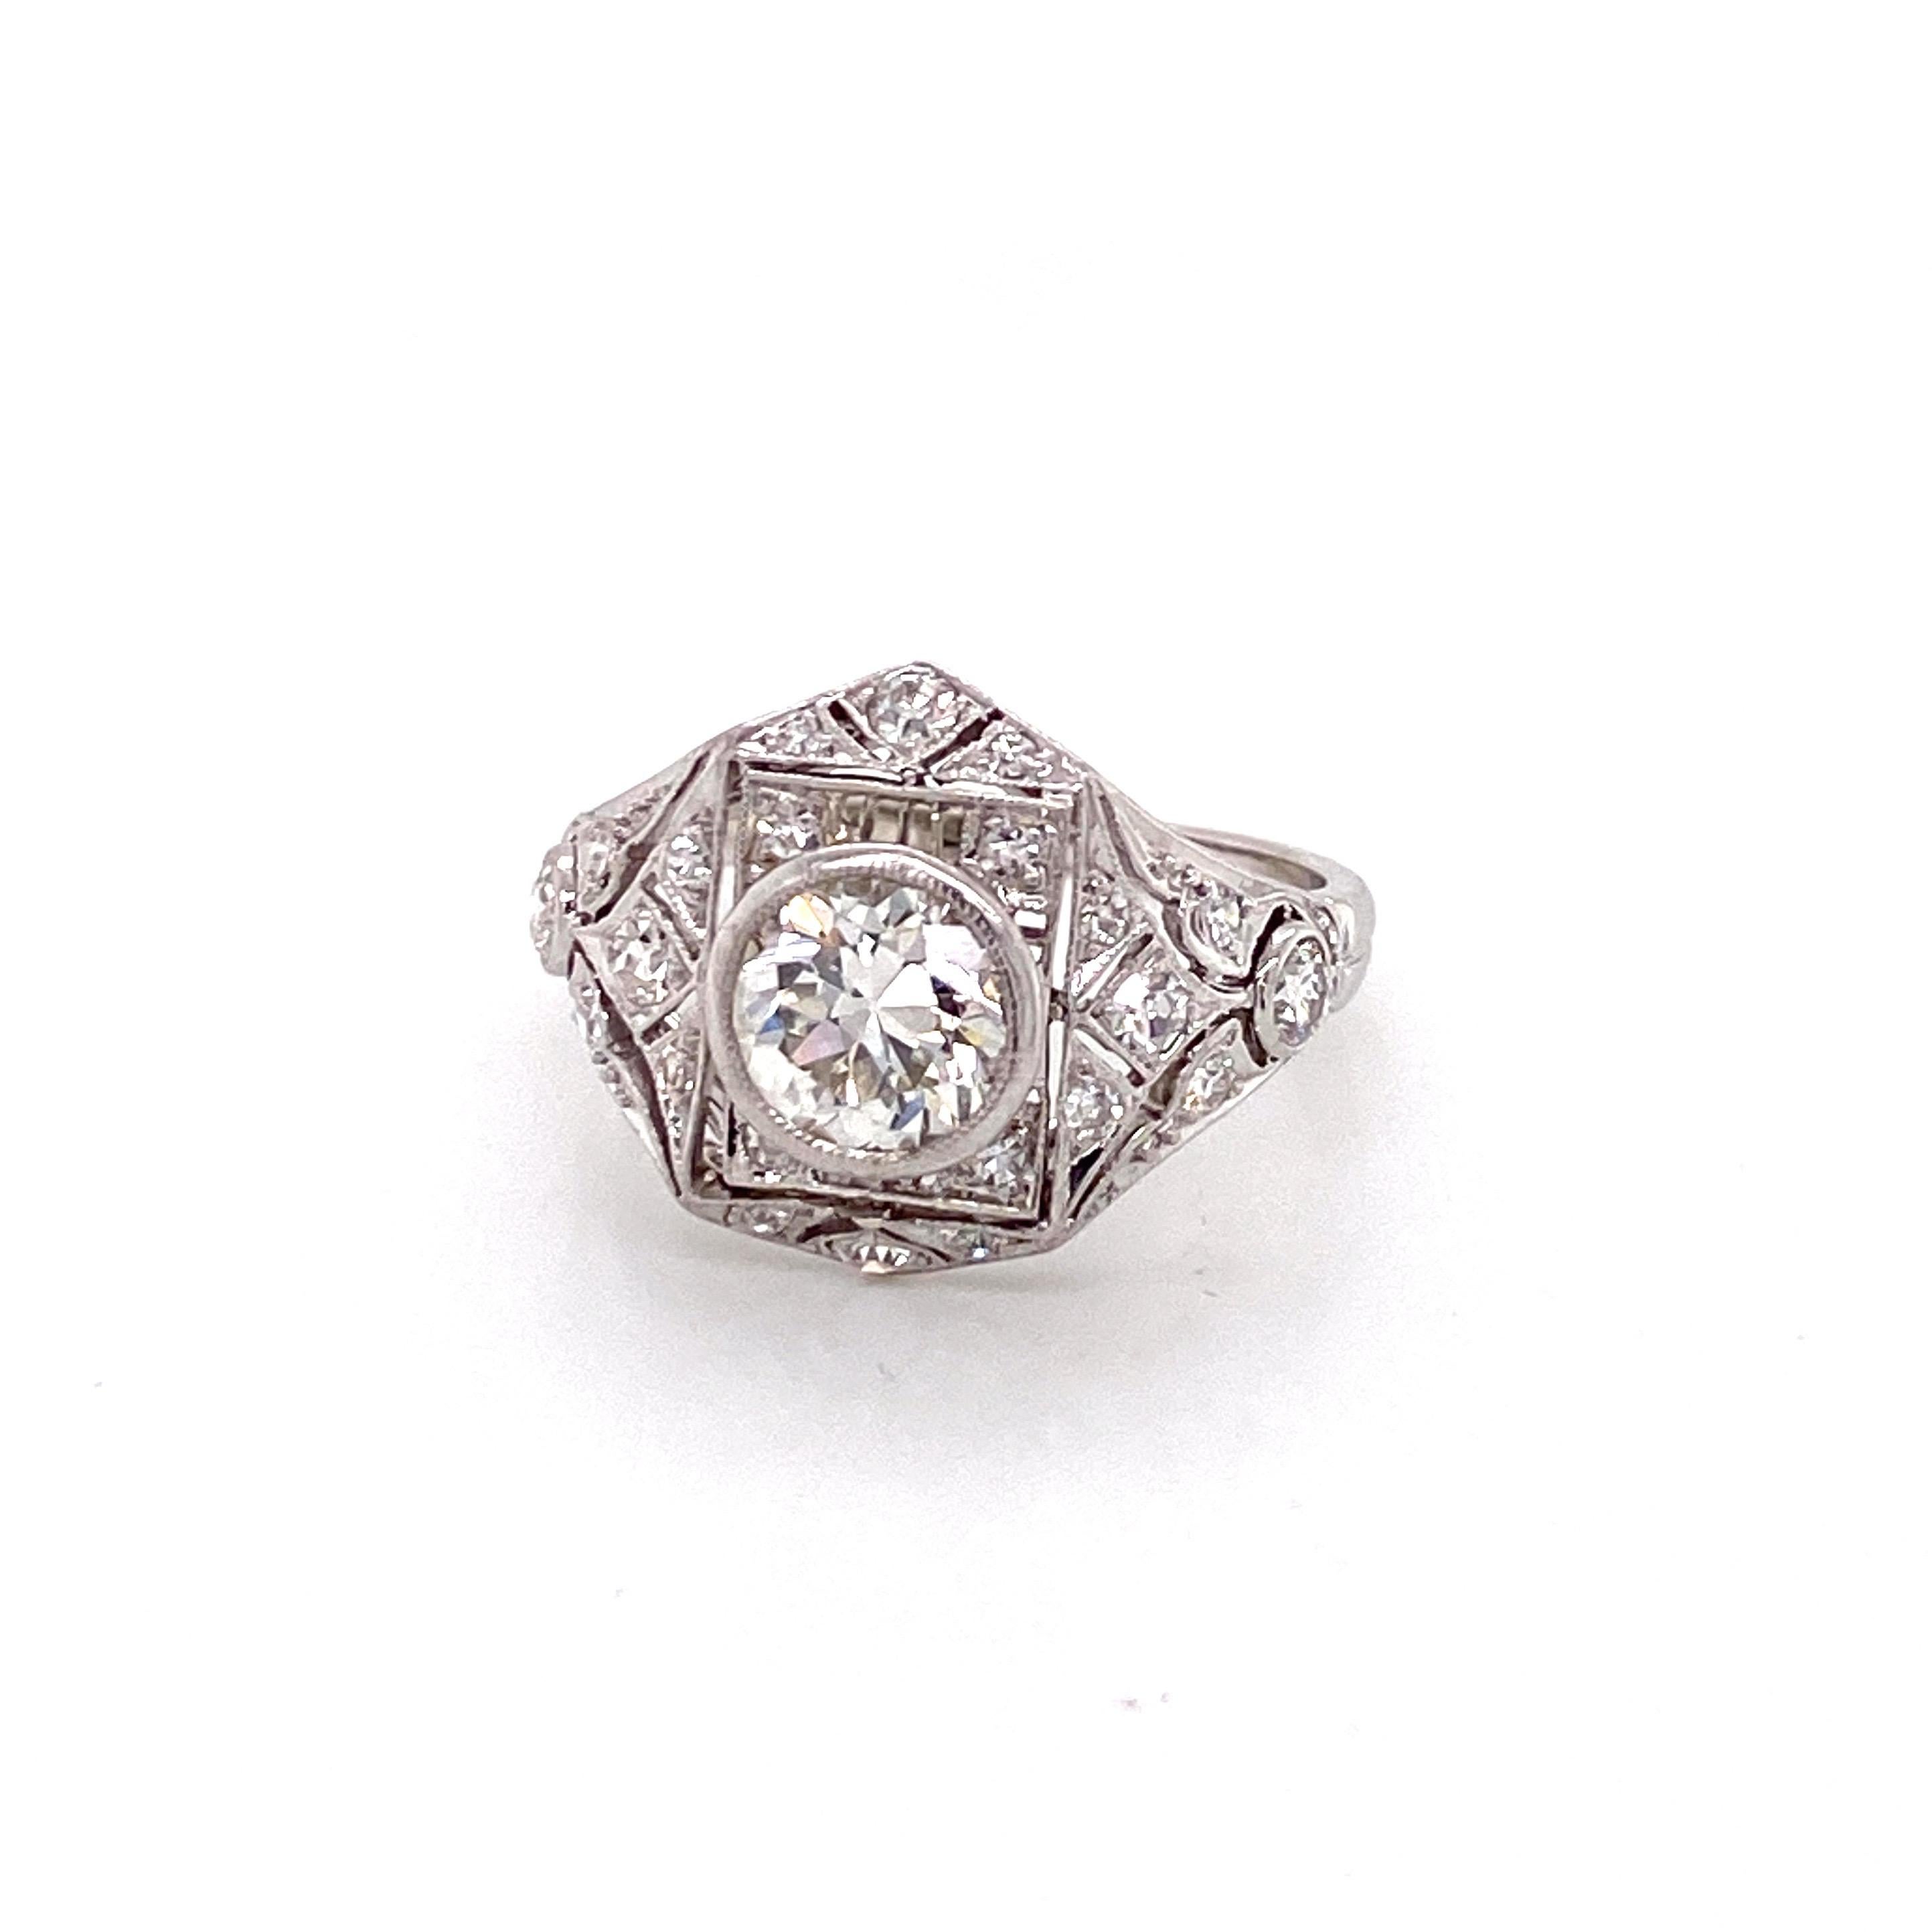 A magnificent representation of the artistry and opulence of the Jazz Age, this exquisite vintage ring dates back to the iconic 1920s. The showstopping centerpiece is a breathtaking European cut diamond weighing approximately 1.25 carats. With its